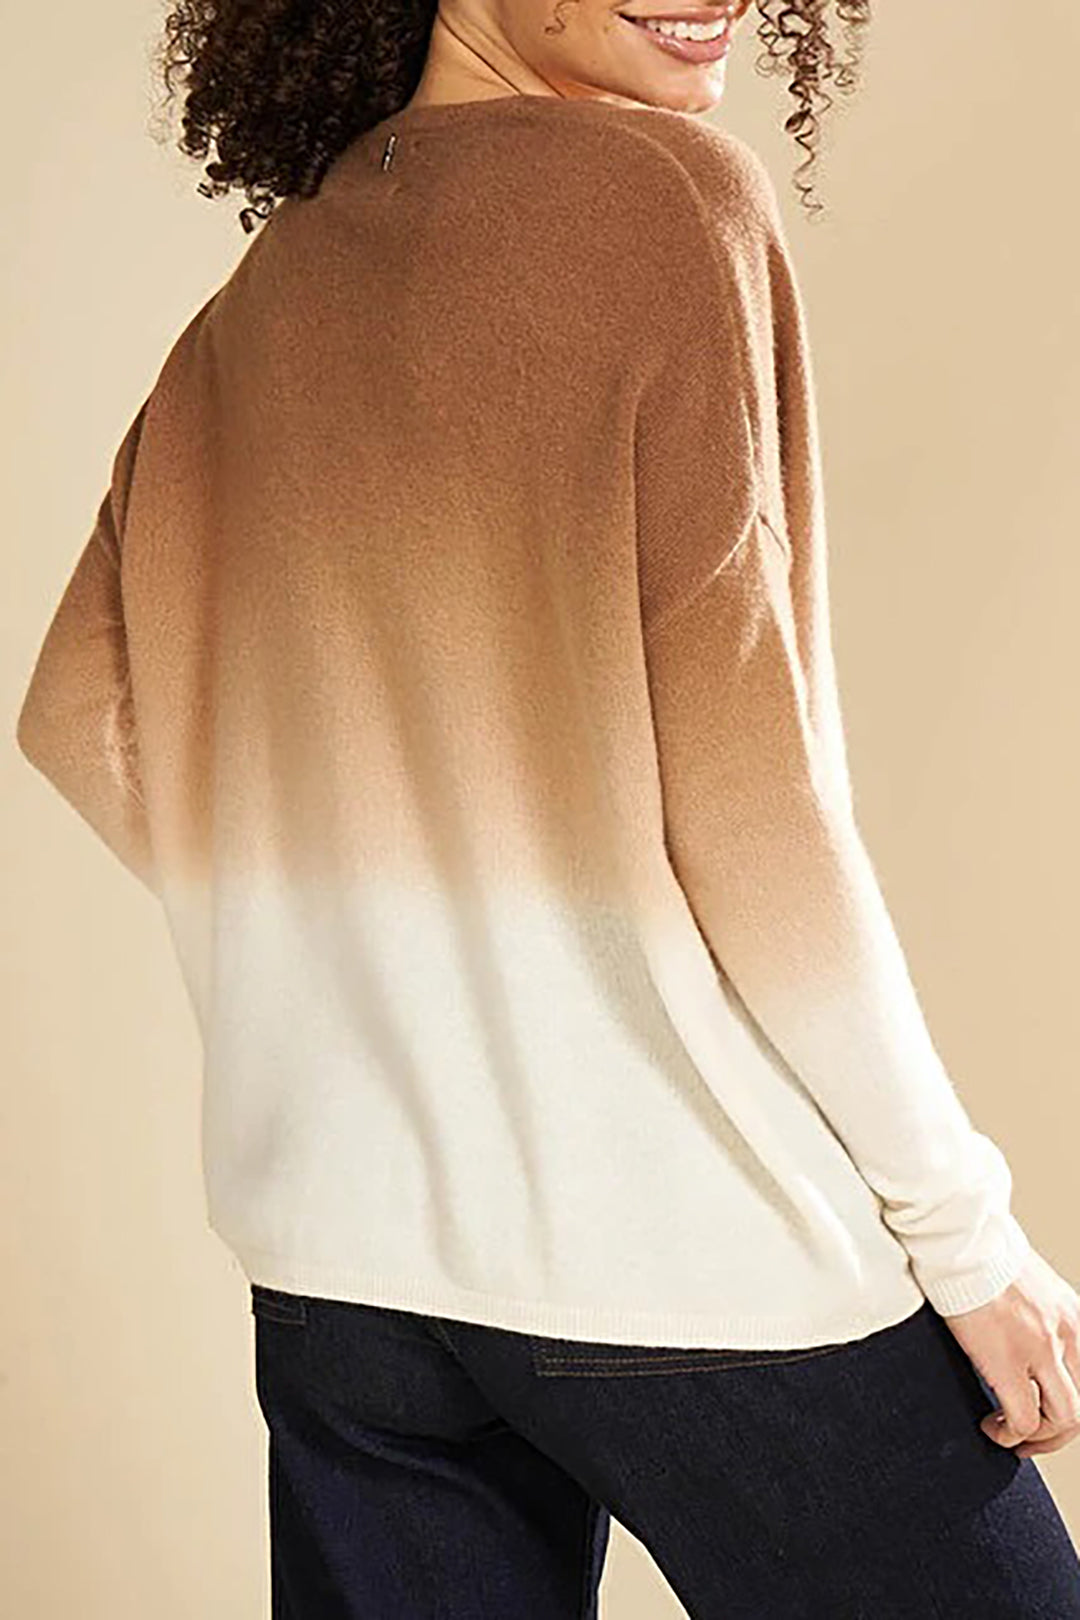 Ombre Round Neck Long Sleeve Sweater